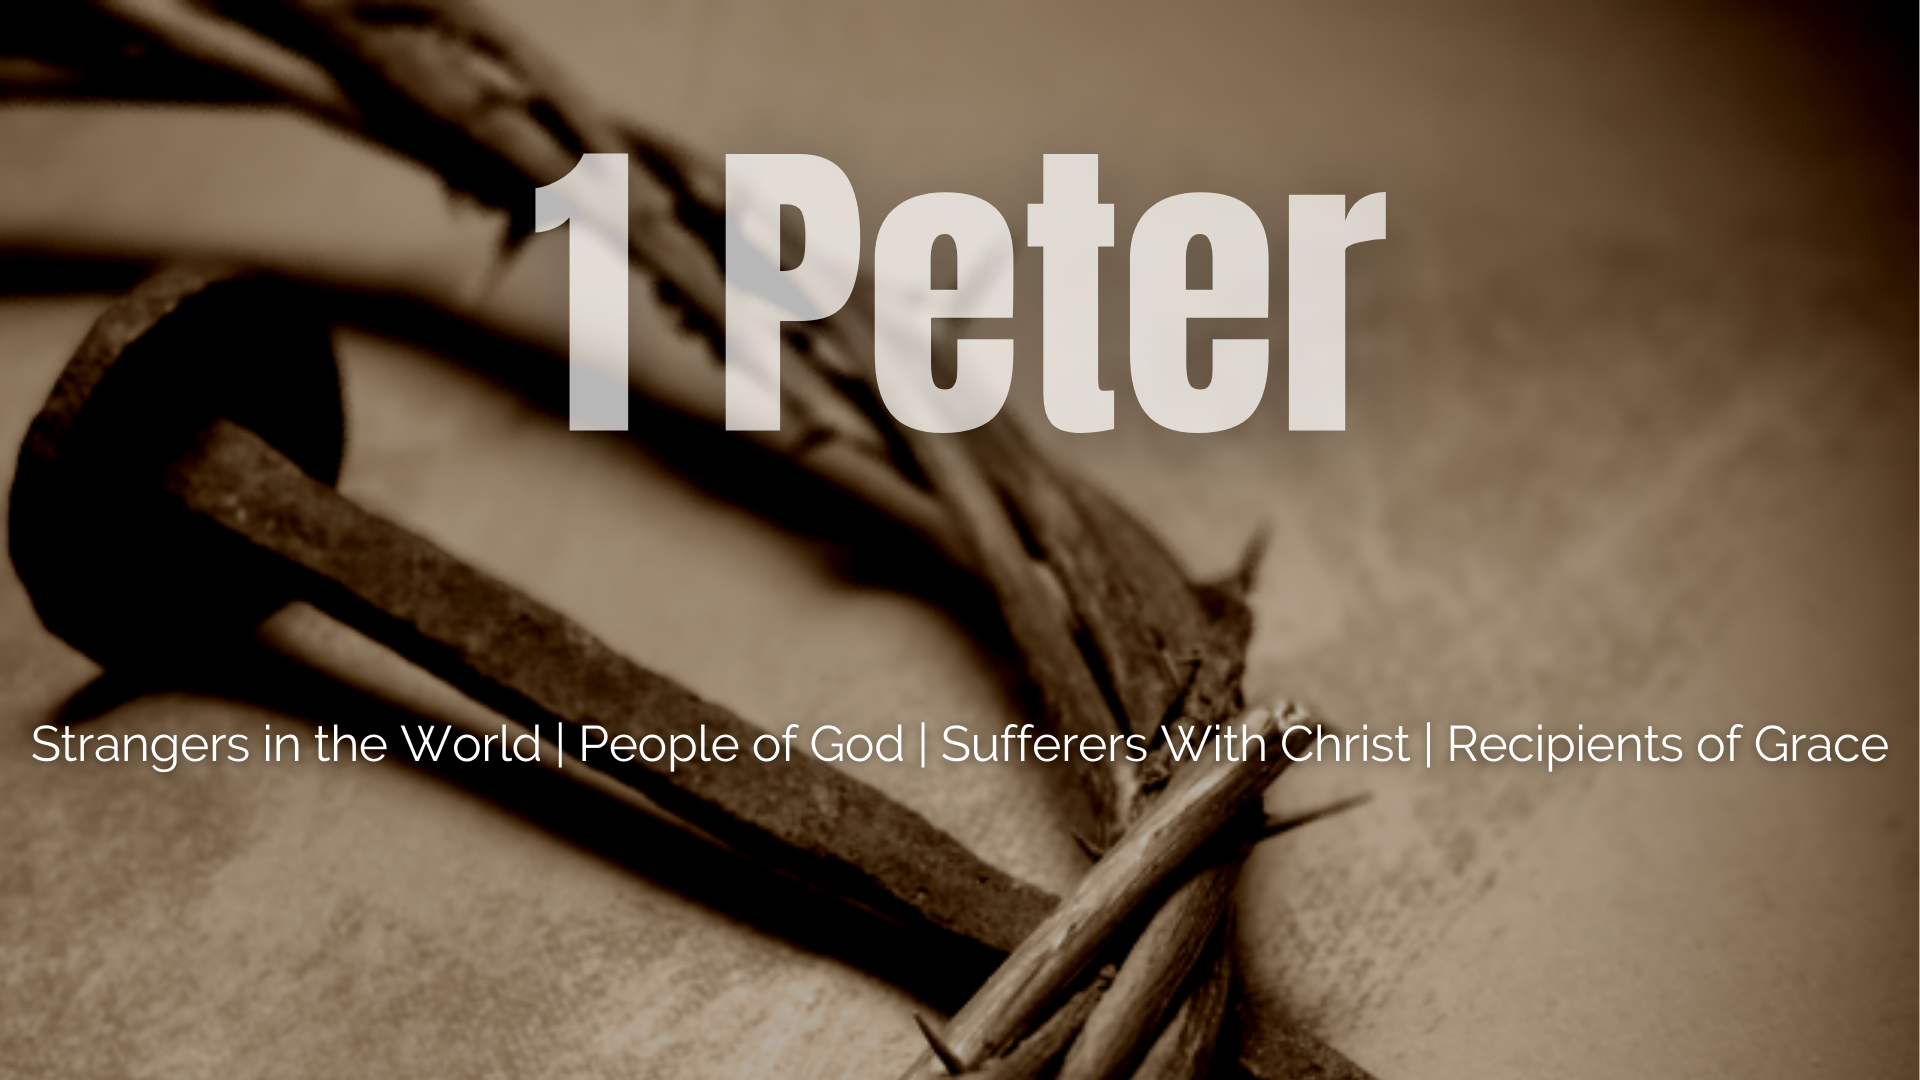 1 Peter - Sufferers with Christ